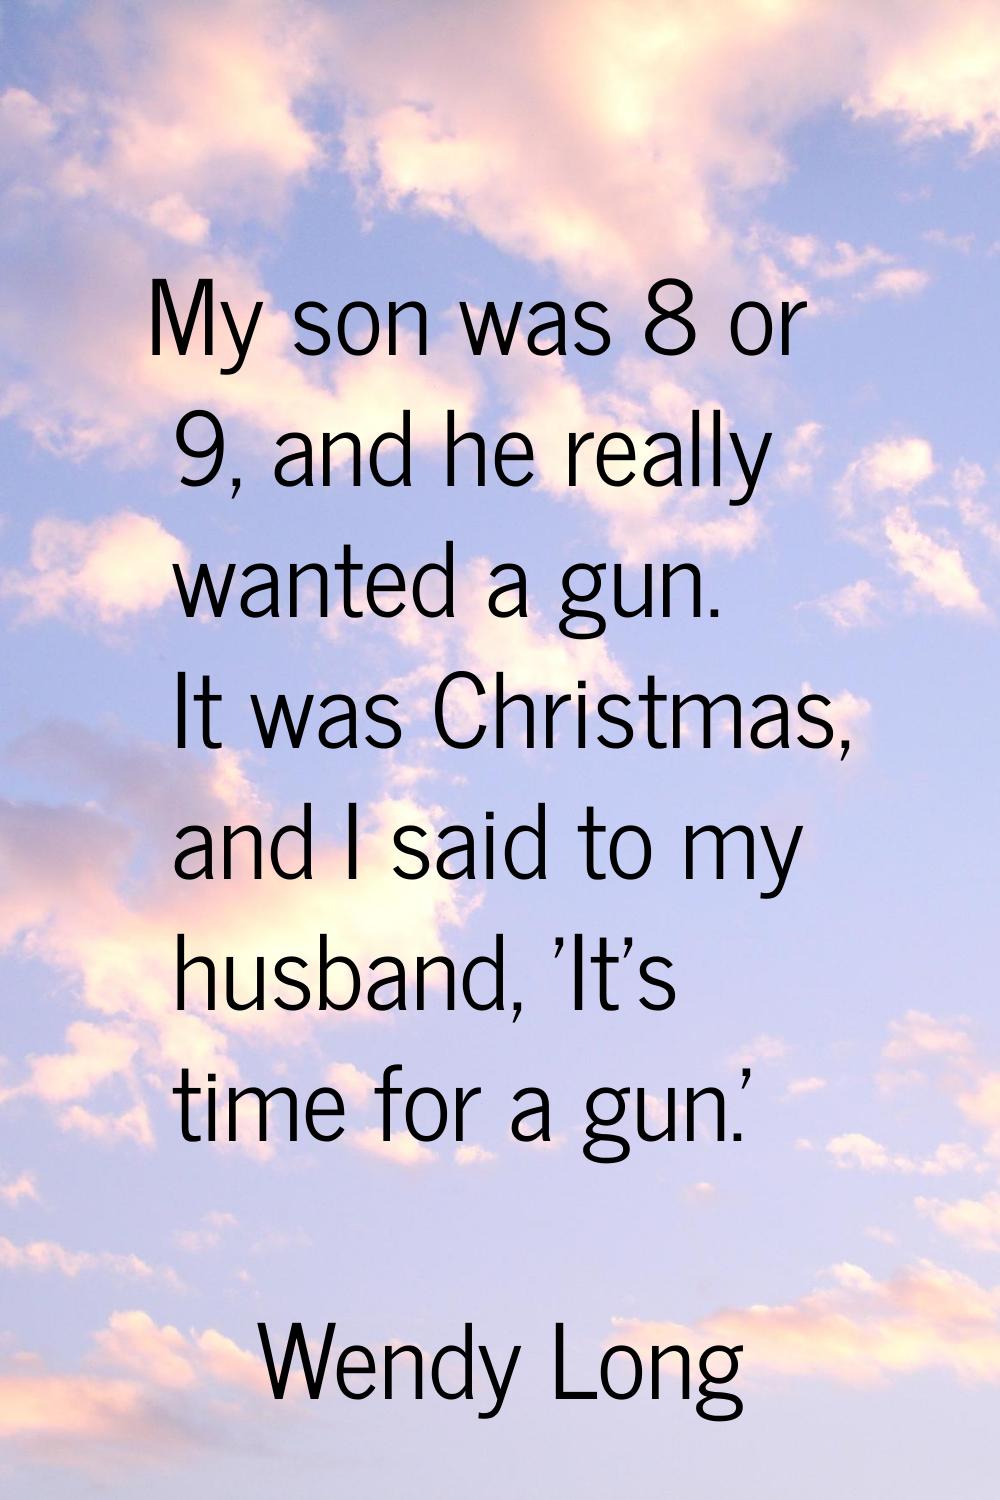 My son was 8 or 9, and he really wanted a gun. It was Christmas, and I said to my husband, 'It's ti